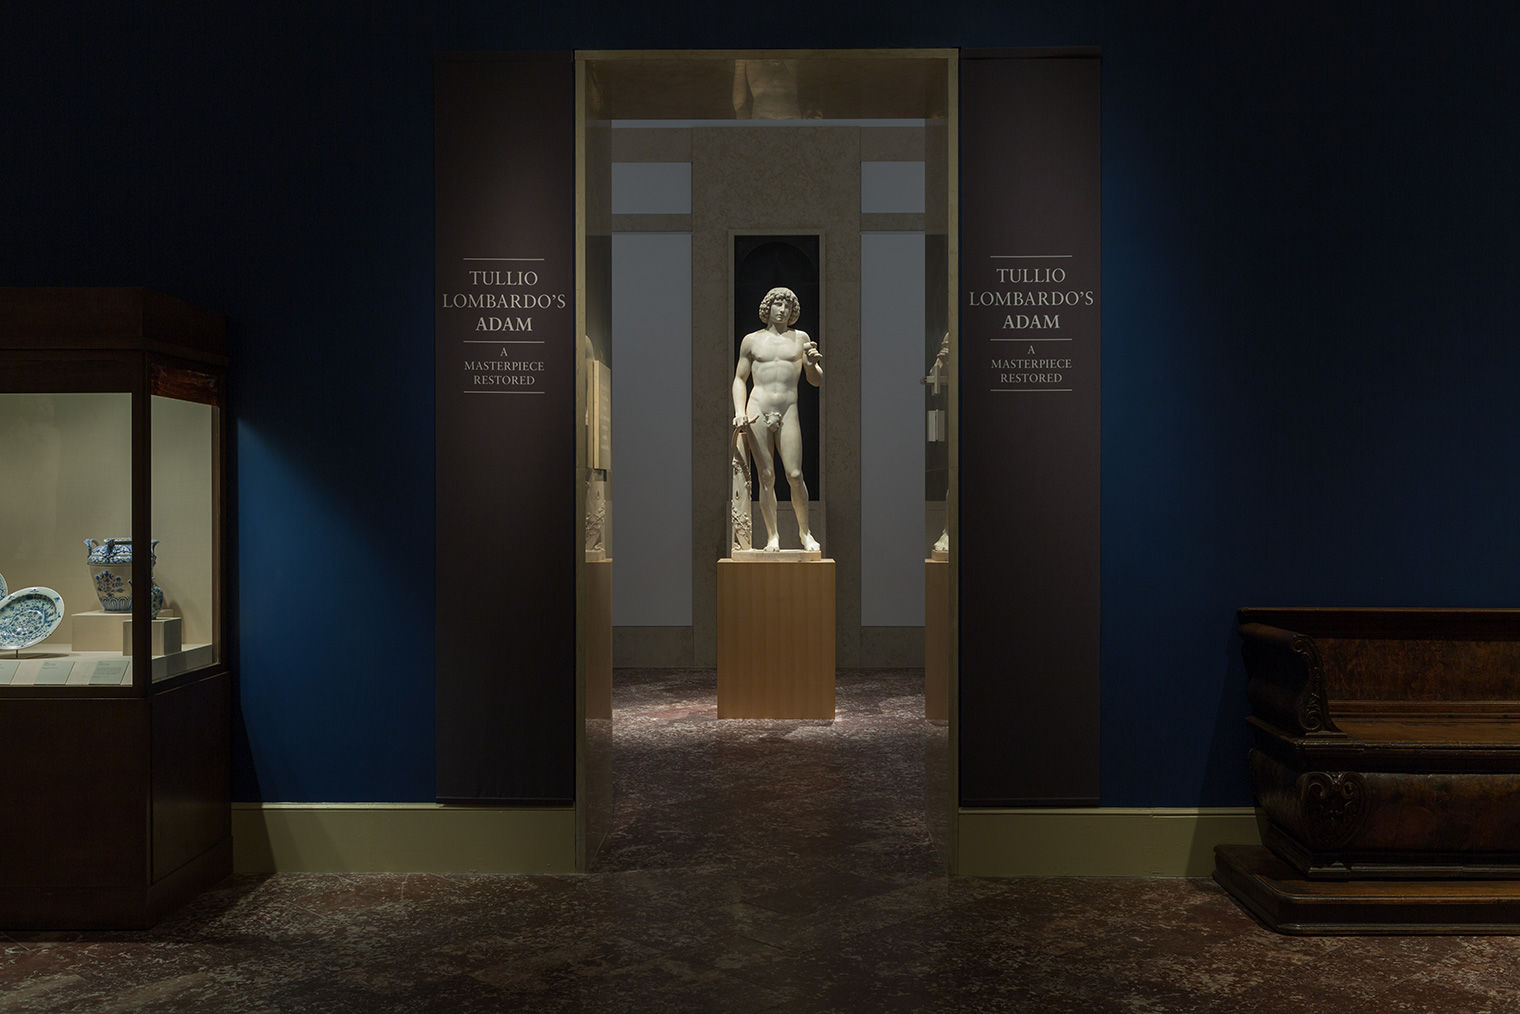 Light is trained on Adam, standing on a wood pedestal and centered within a doorway. Signage around the doorframe announces the exhibit celebrating his restoration.